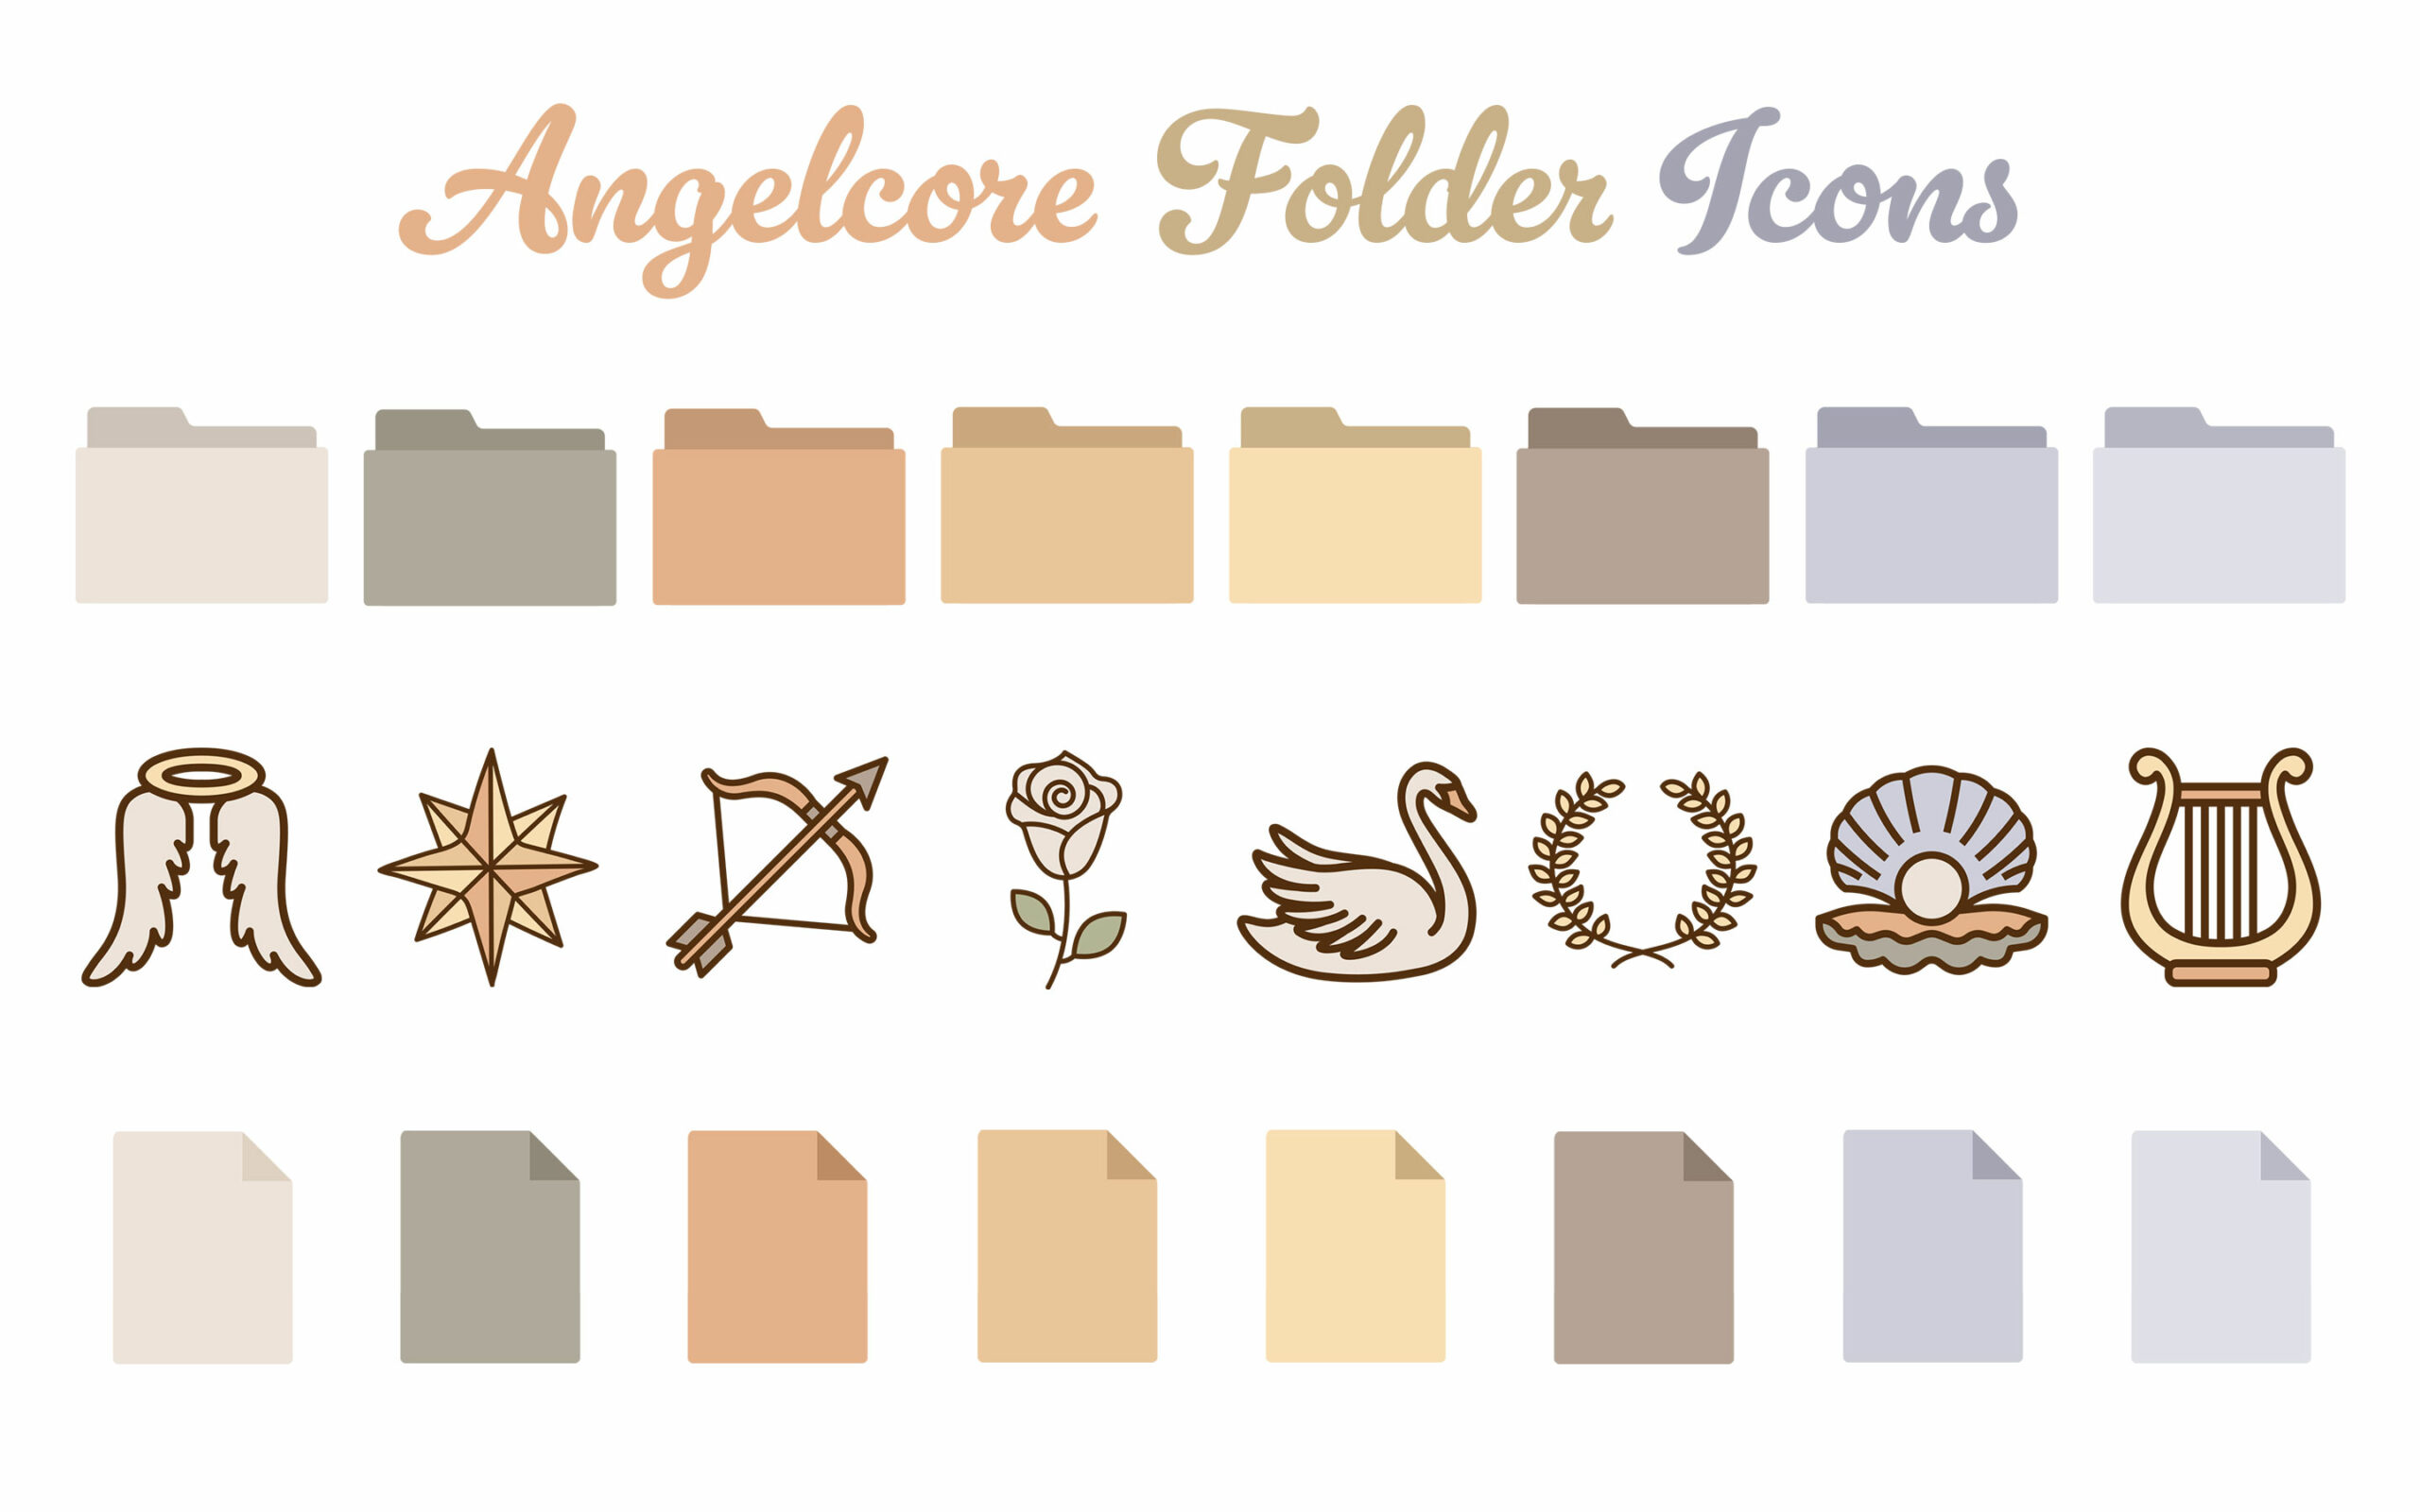 angelcore folder icons 1